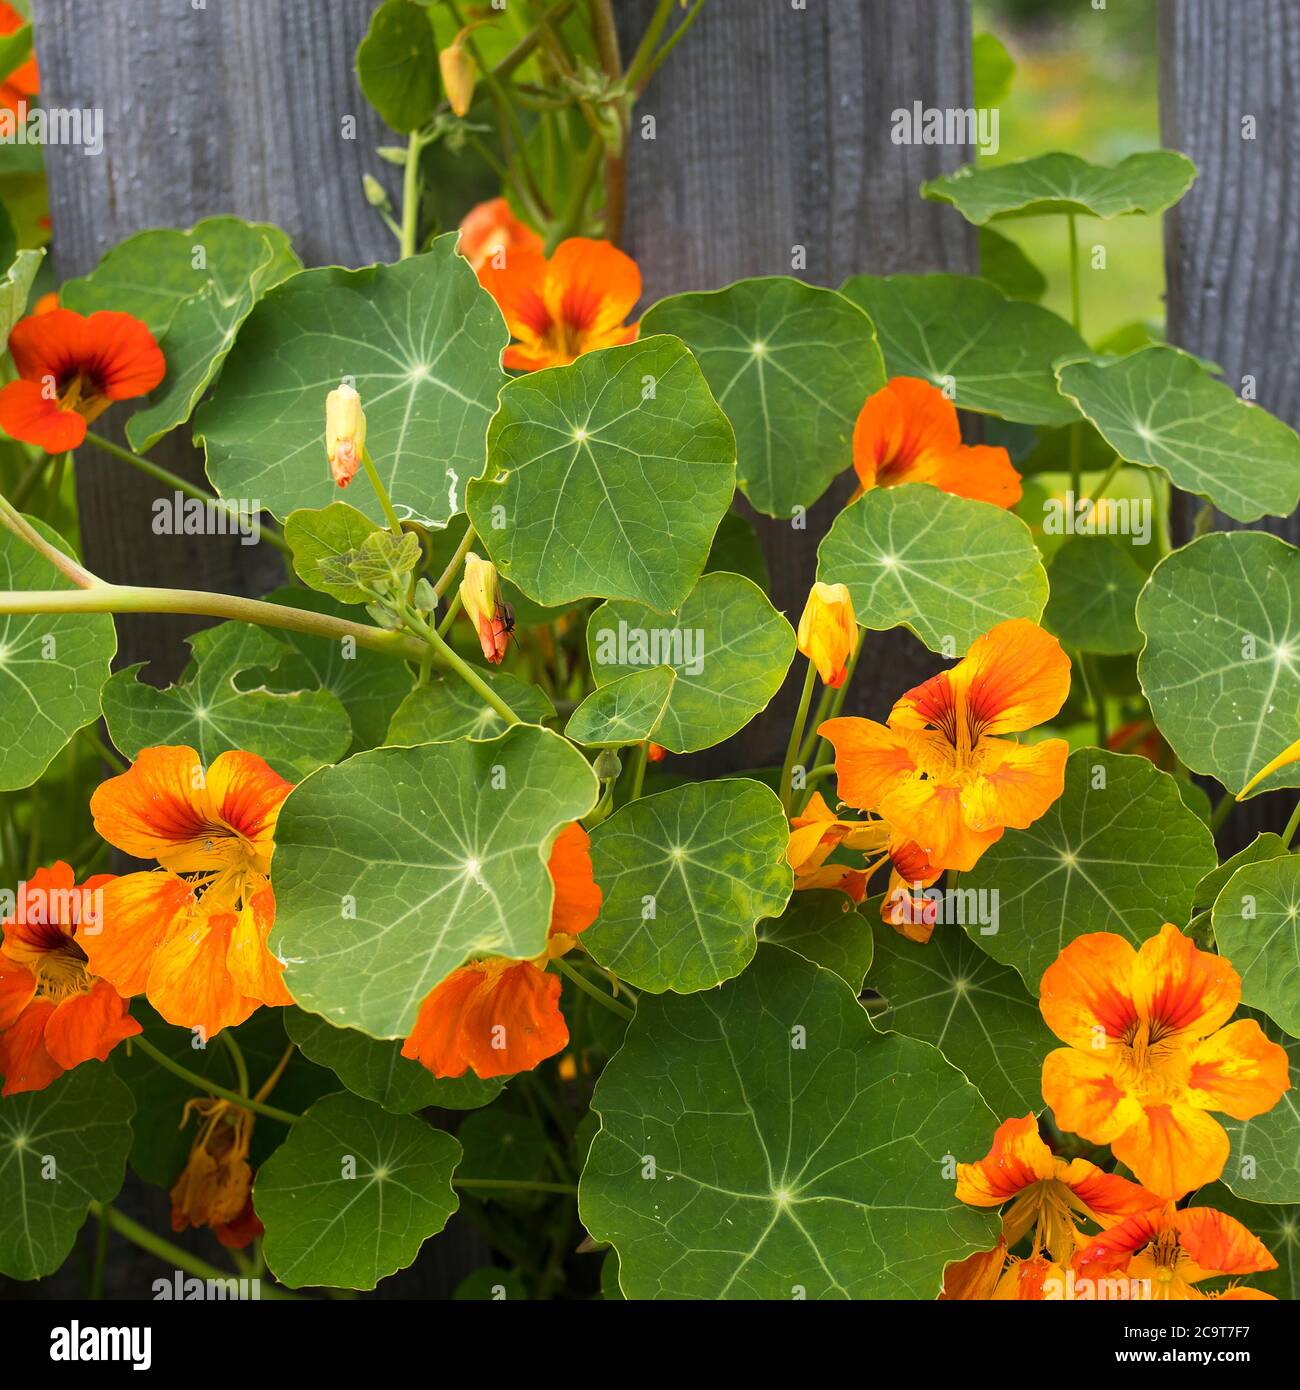 Page 11 - Orange Flowers Of Garden Nasturtium High Resolution Stock  Photography and Images - Alamy